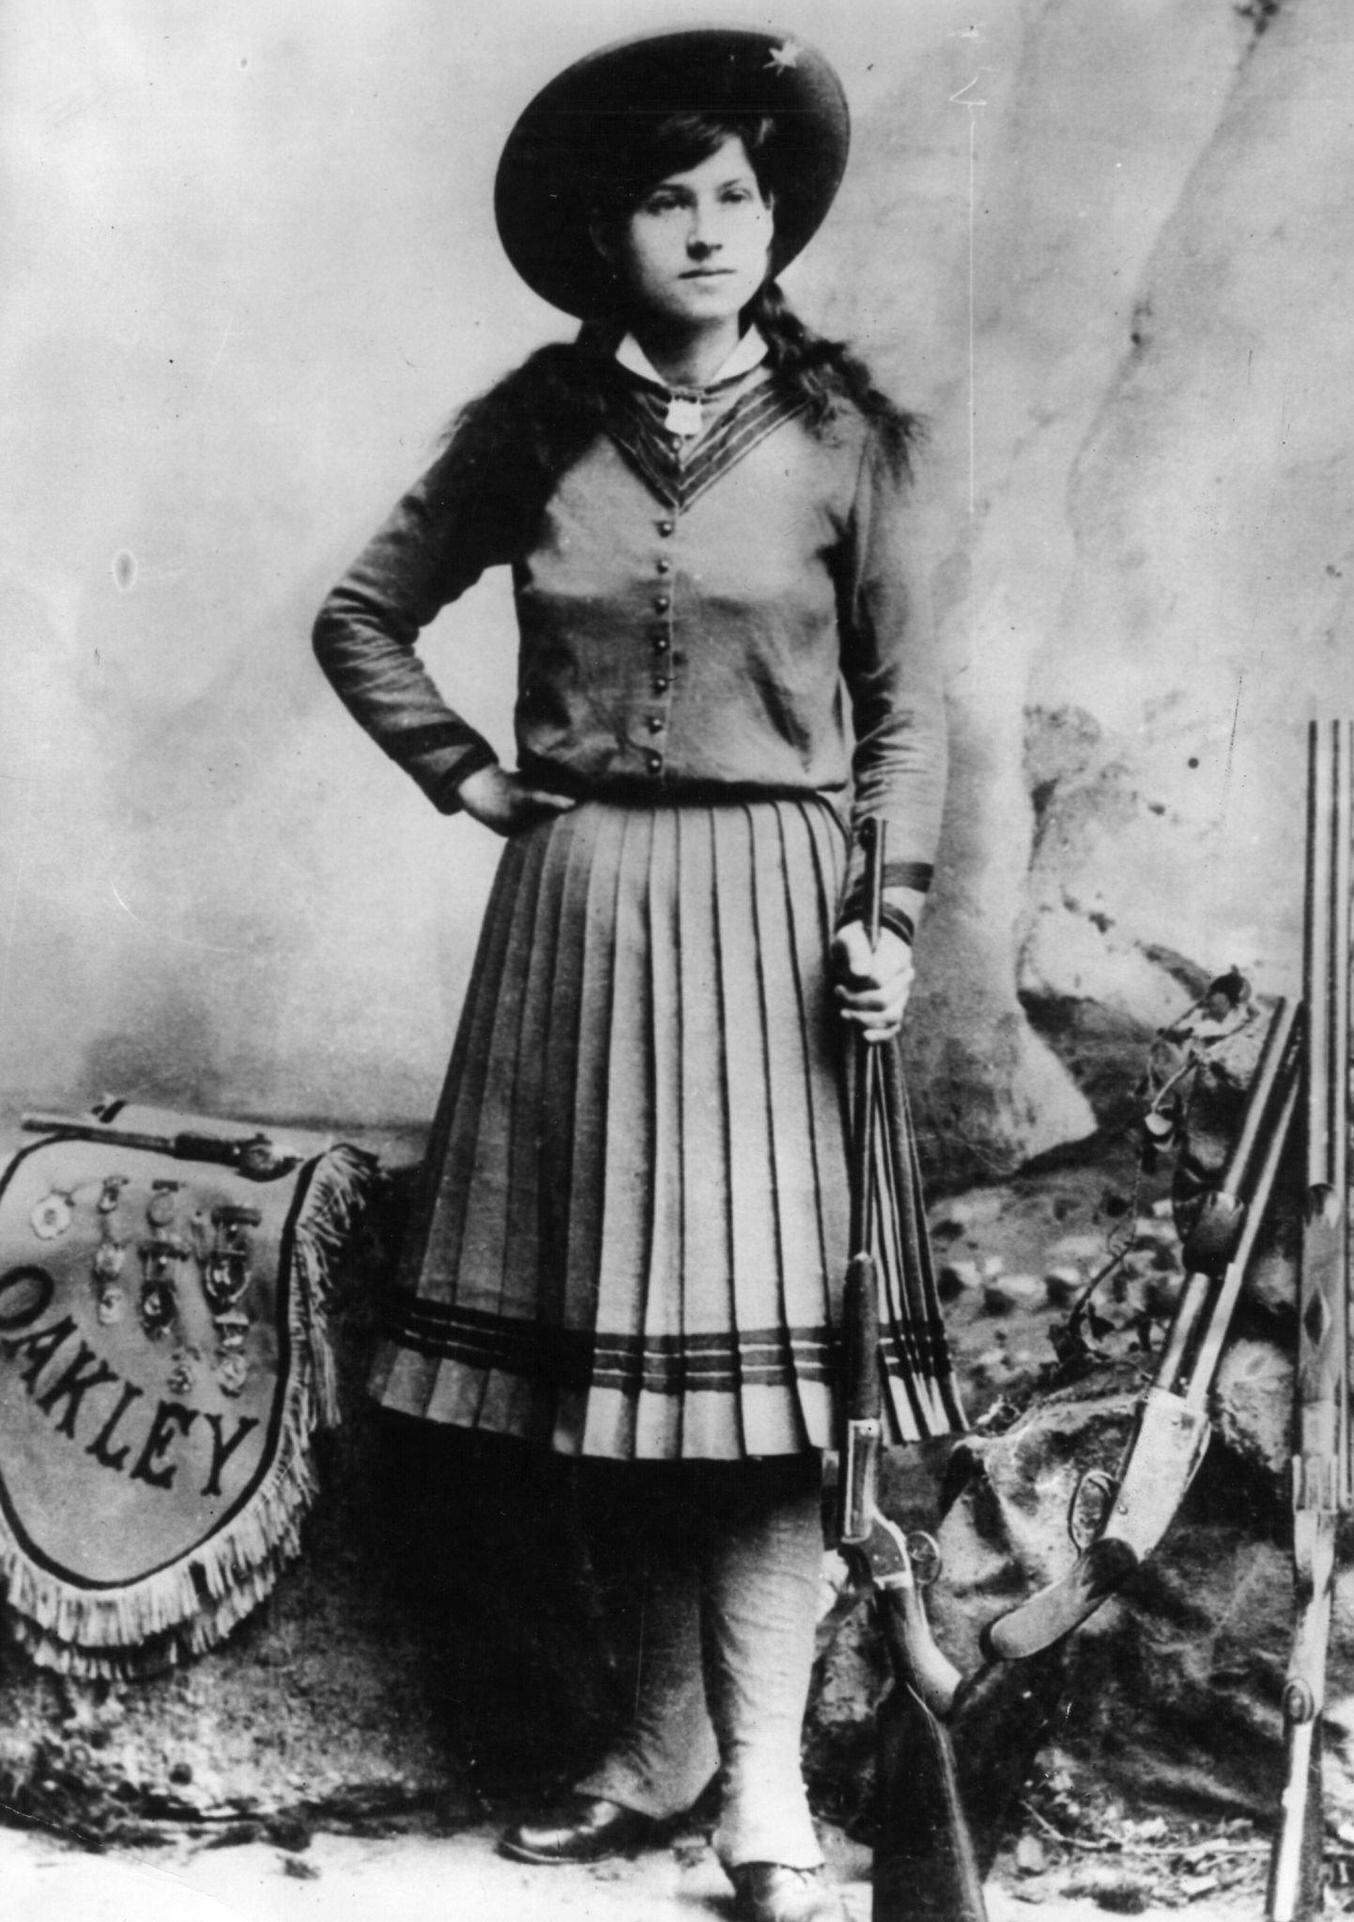 Annie Oakley, US rodeo star Annie Oakley (1860 - 1926), who was famous as a highly skilled trick shooter with the Buffalo Bill Wild West Show. One of her tricks was to shoot cigarettes from her husband's mouth.